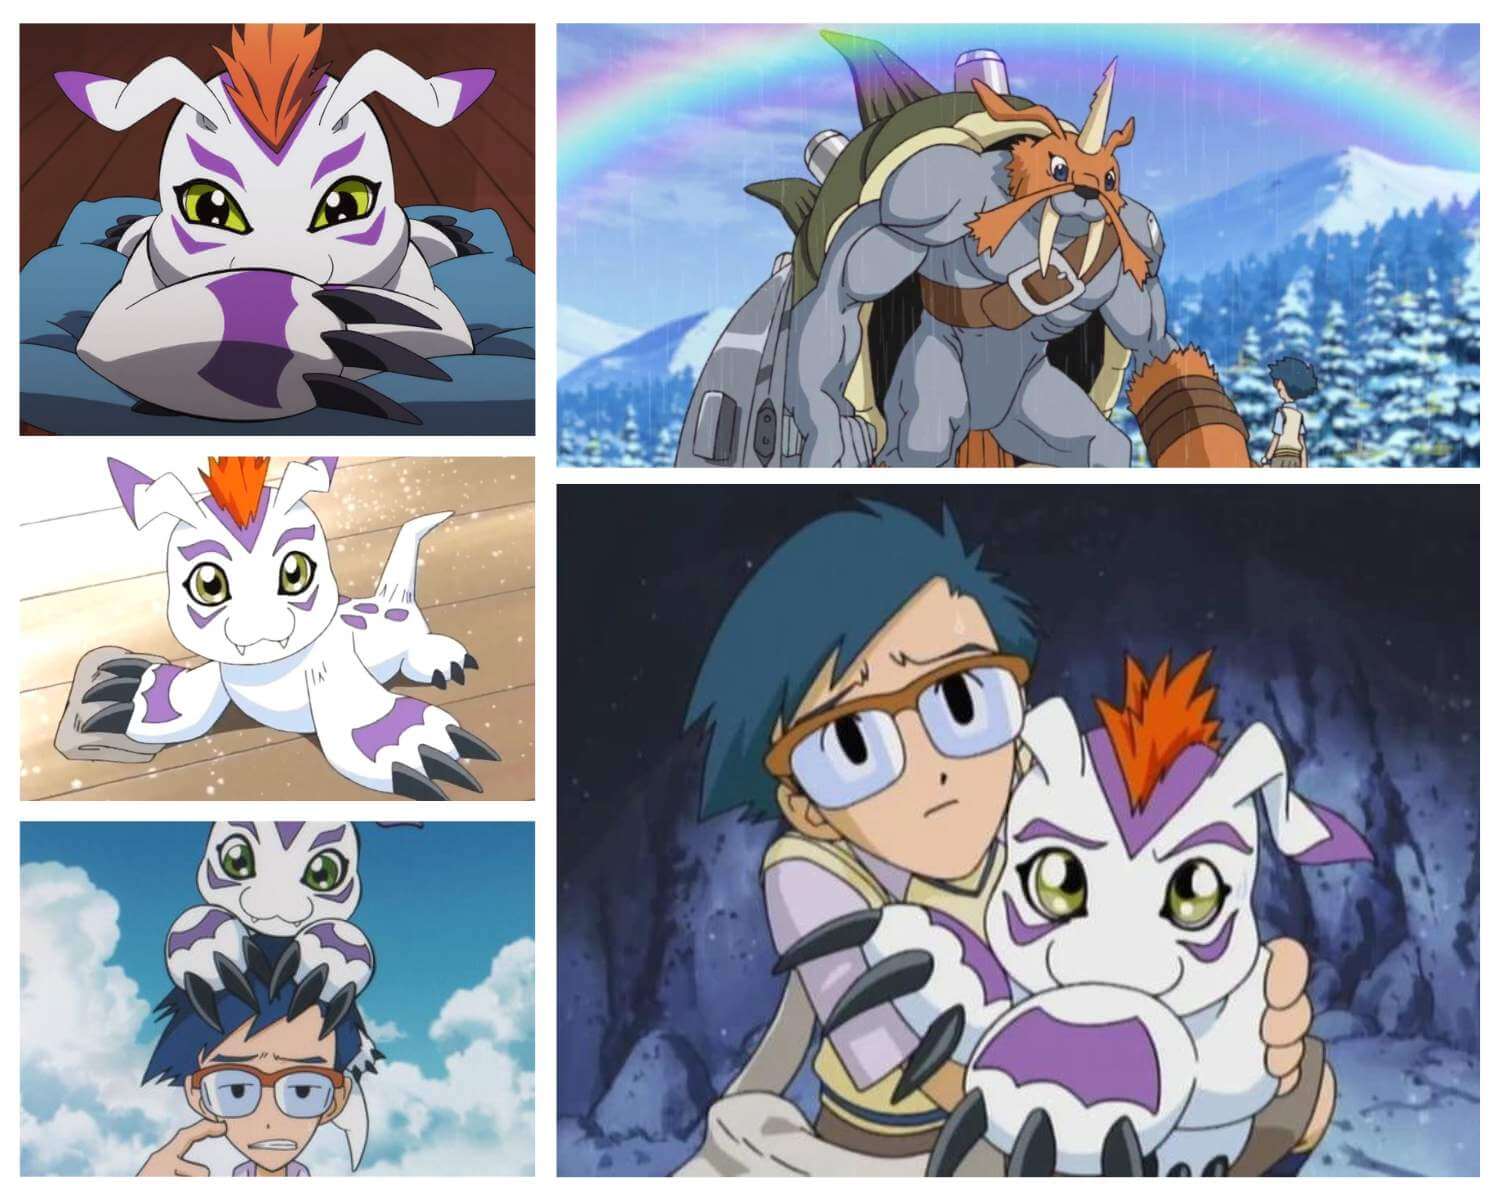 Gomamon The Ultimate Guide to This Adorable Digimon